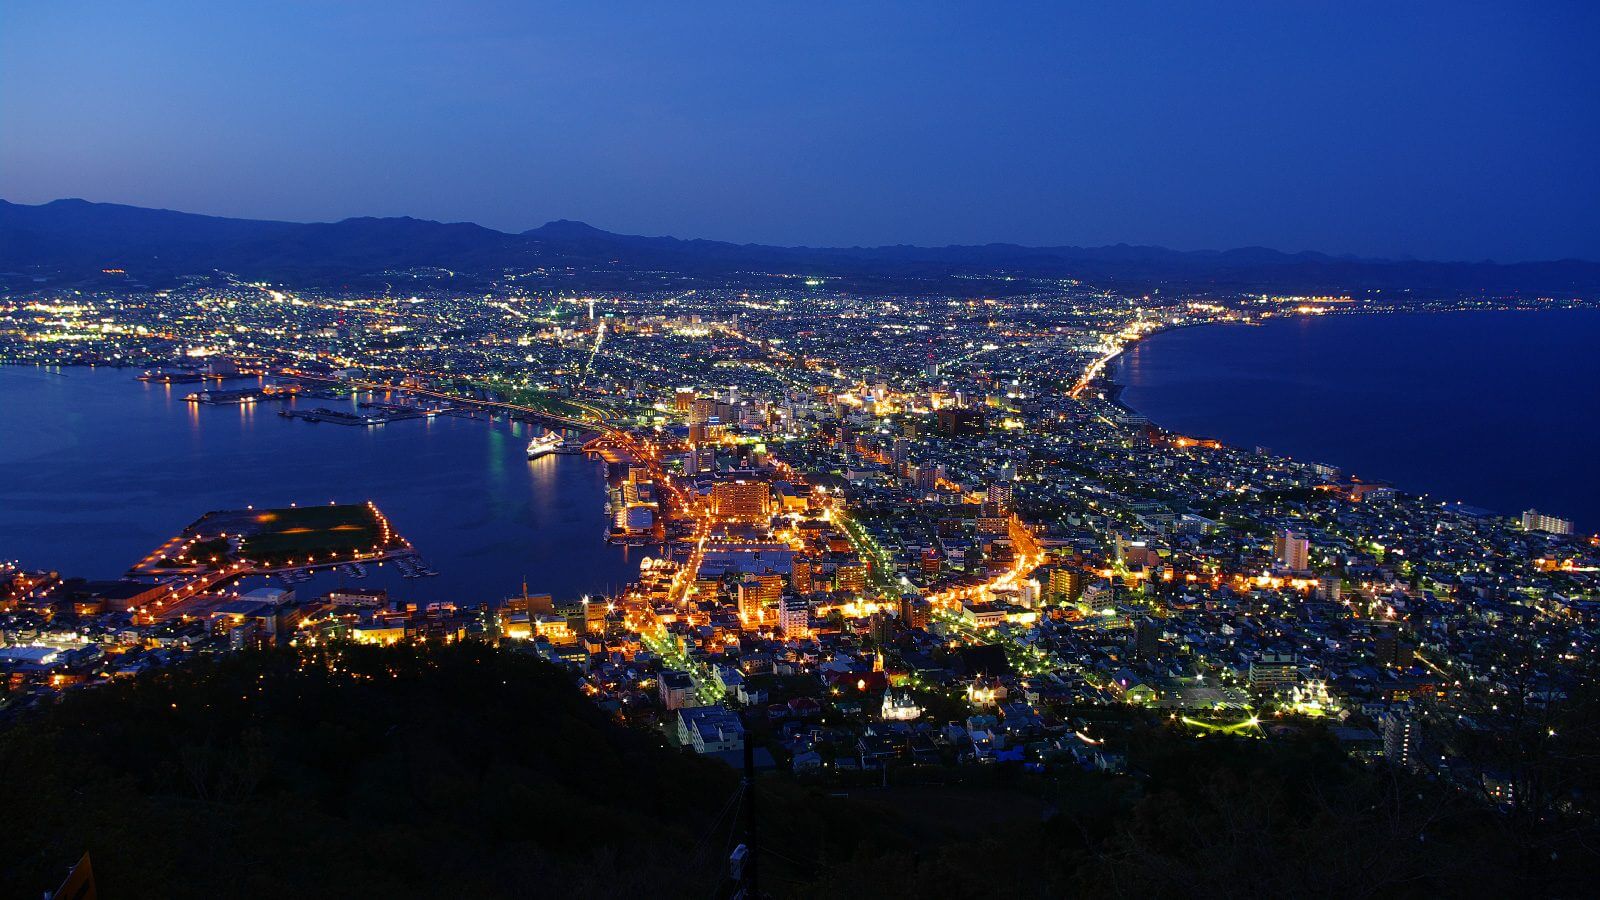 Night View from Mt. Hakodate